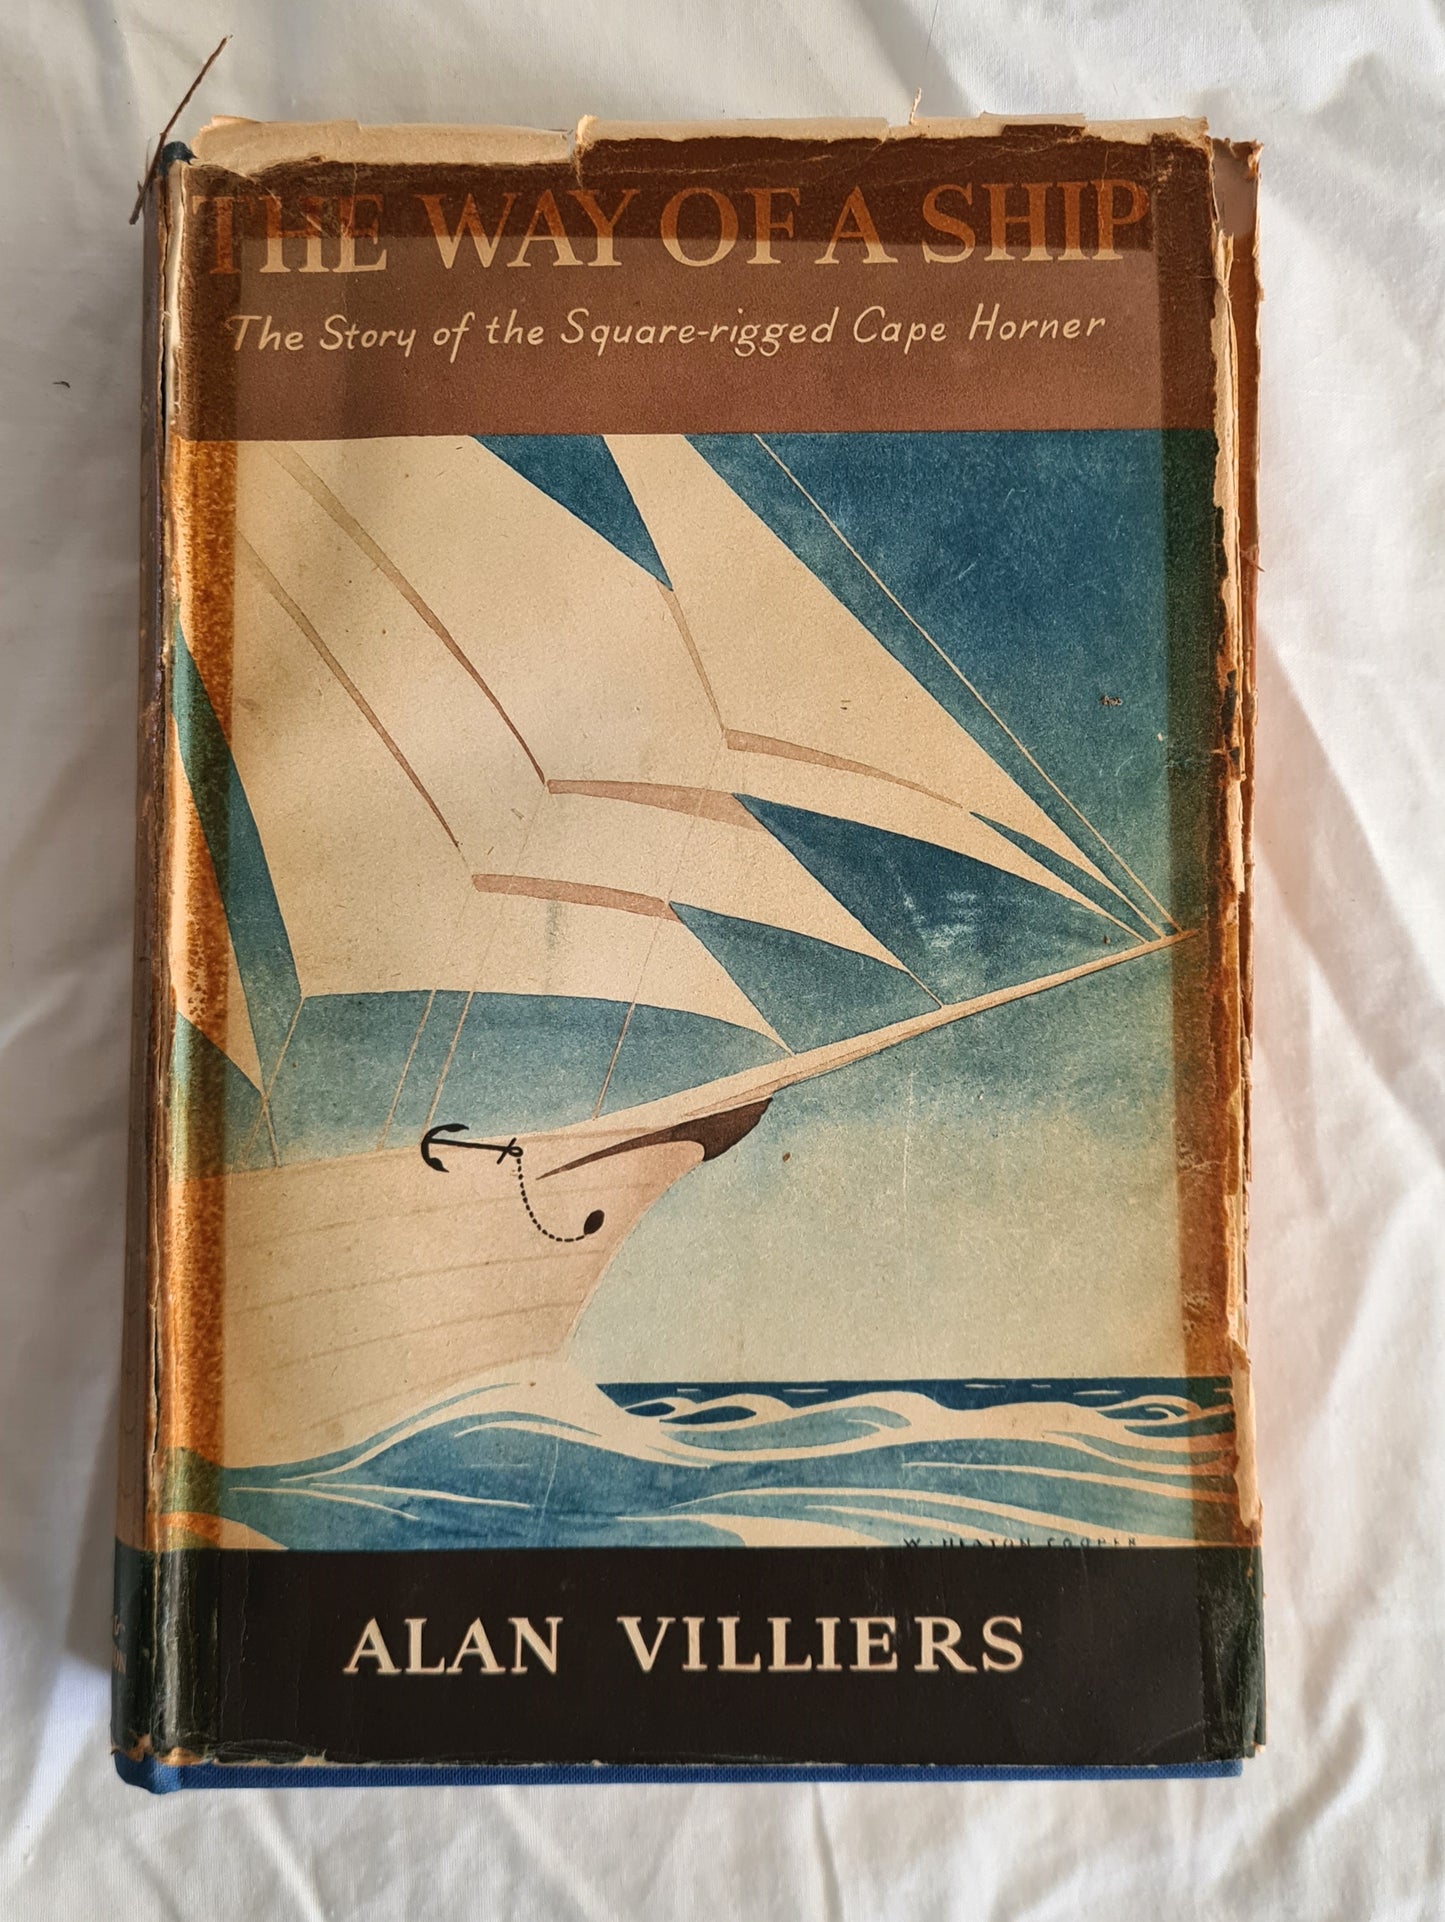 The Way of a Ship  The Story of the Square-rigged Cape Horner  by Alan Villiers